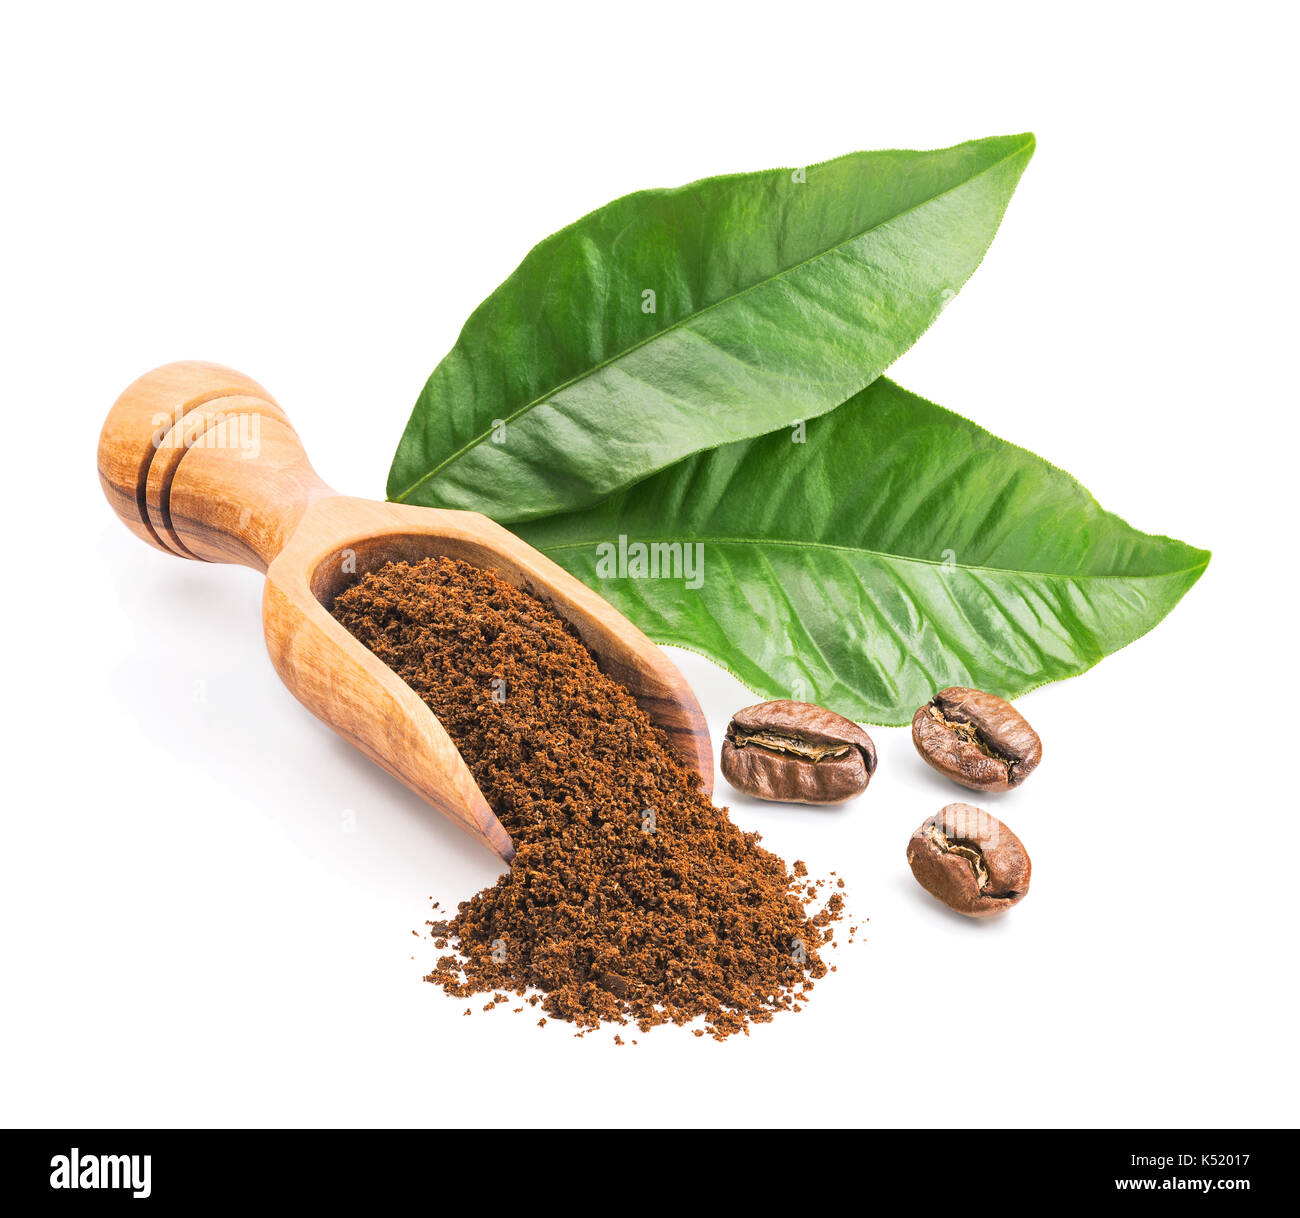 Ground coffee and leaves isolated on white Stock Photo